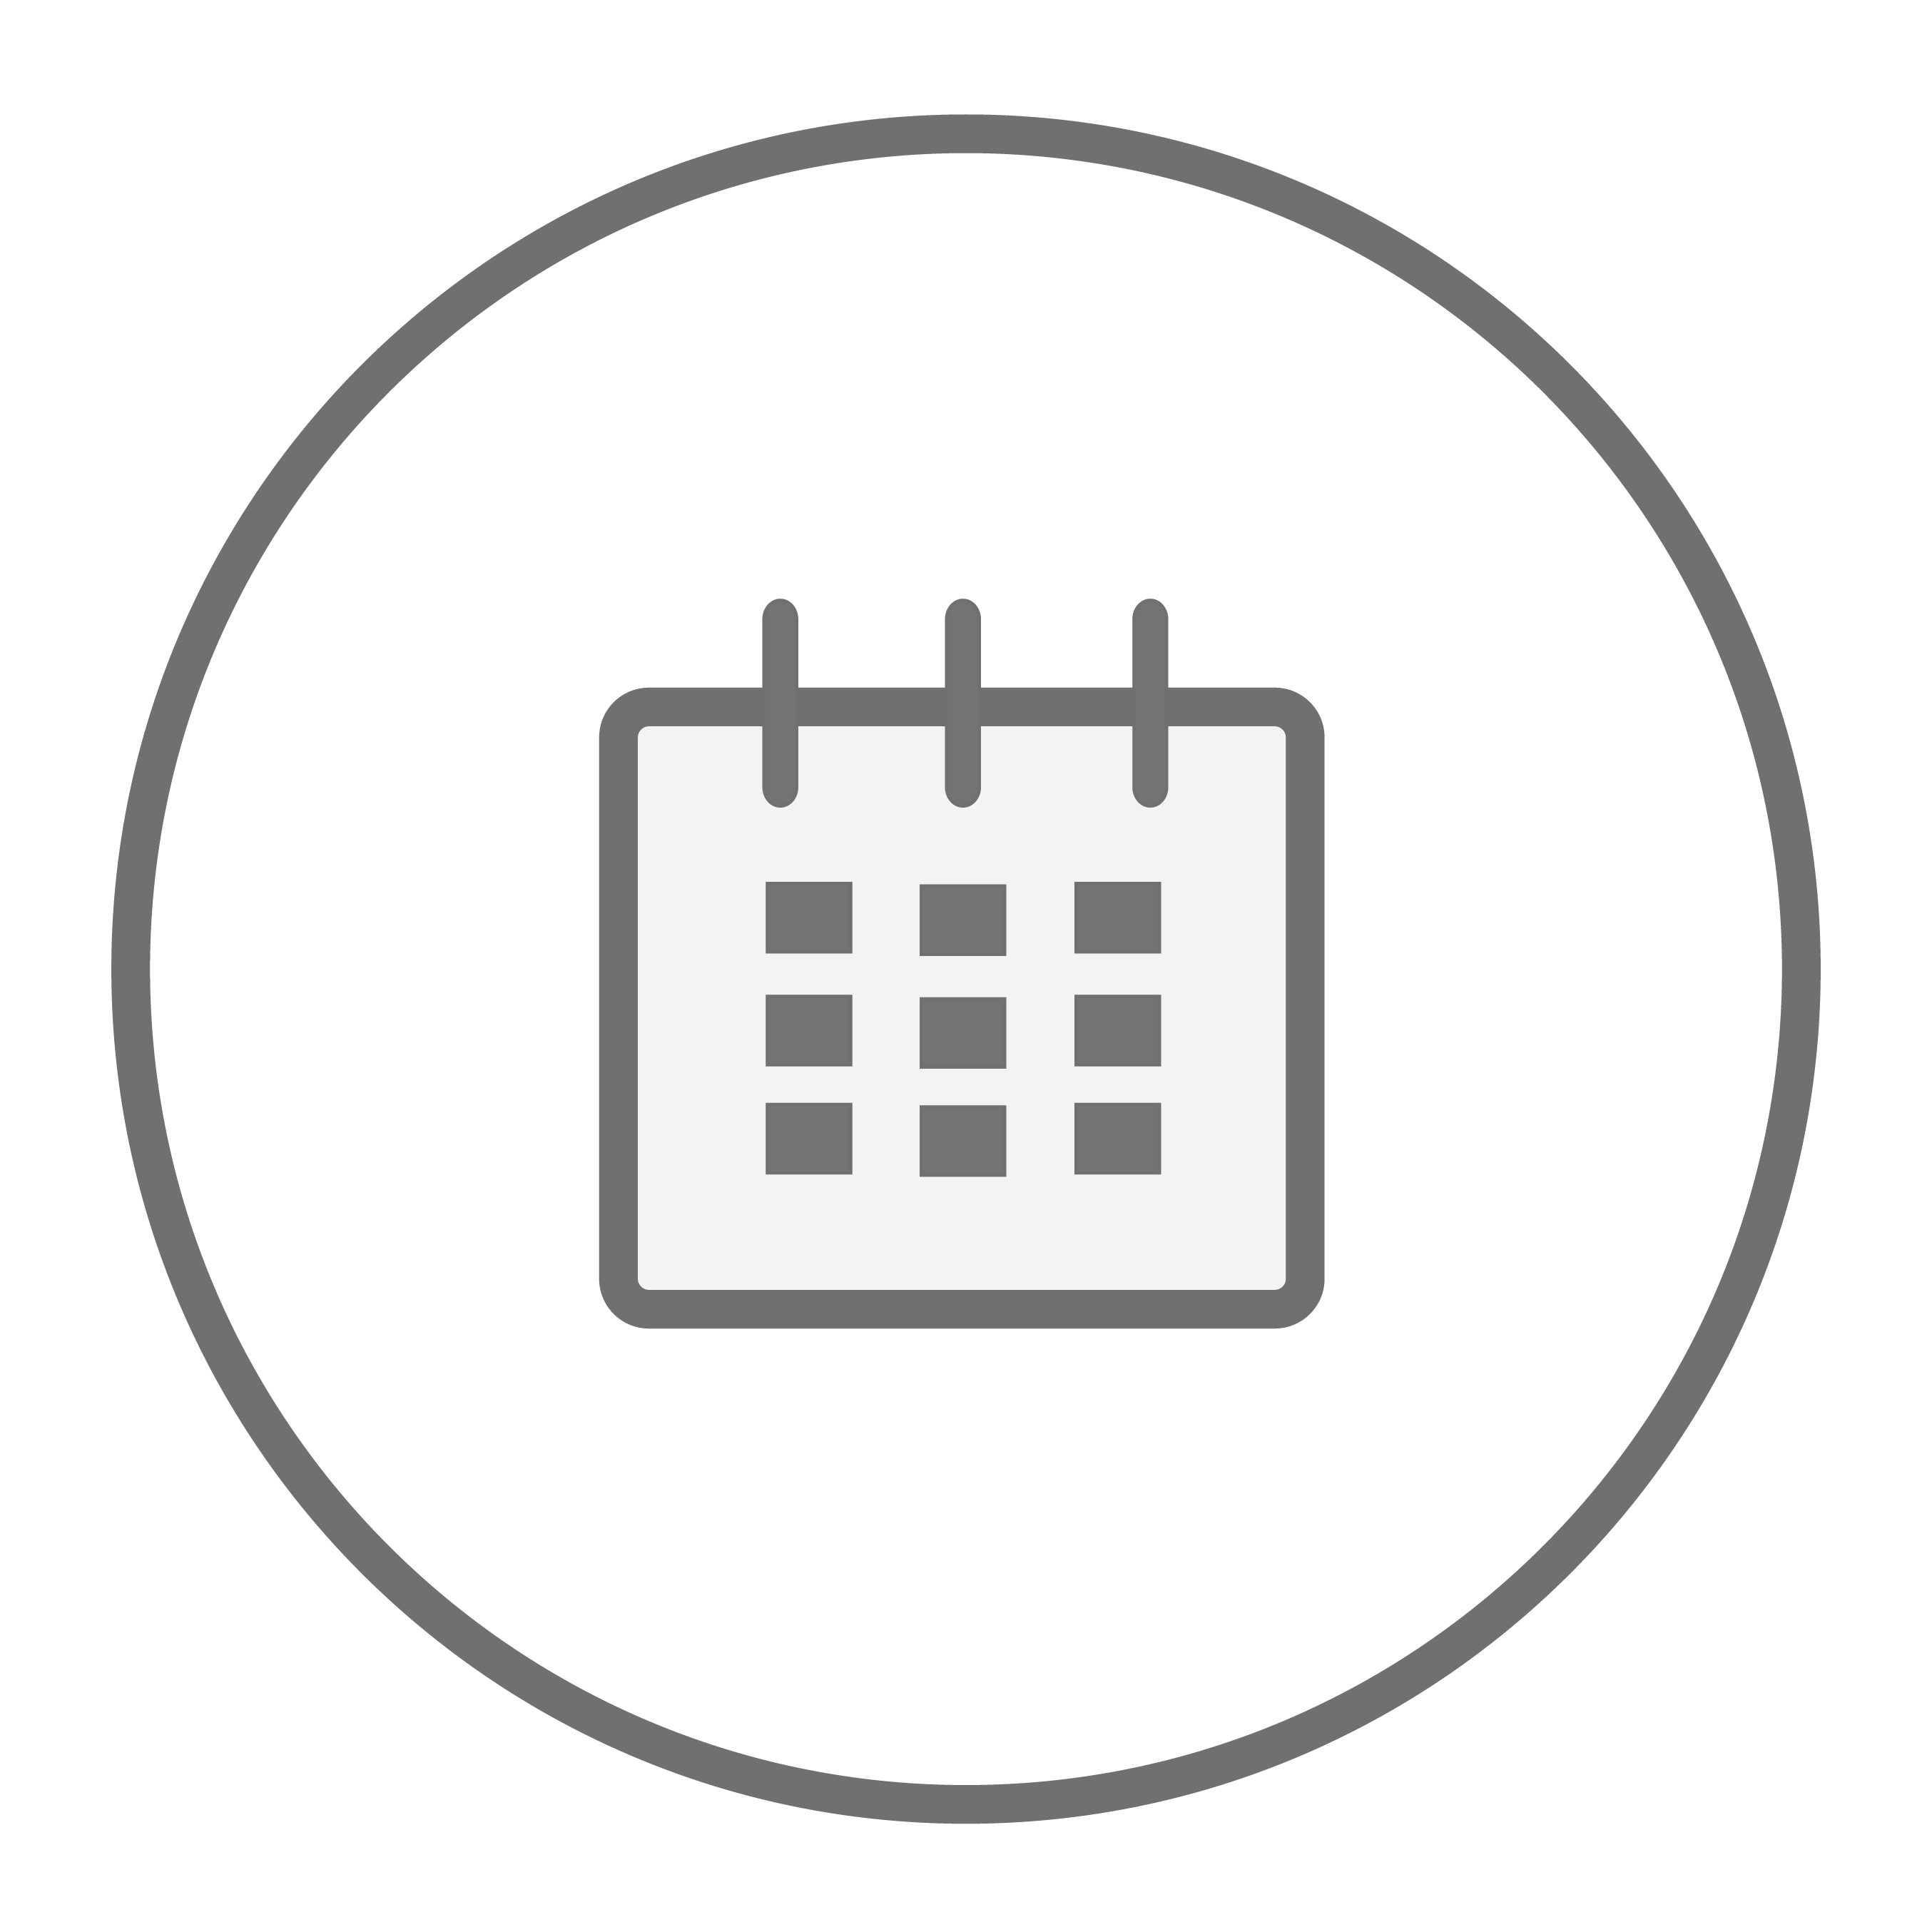 Appointment Schedule icon